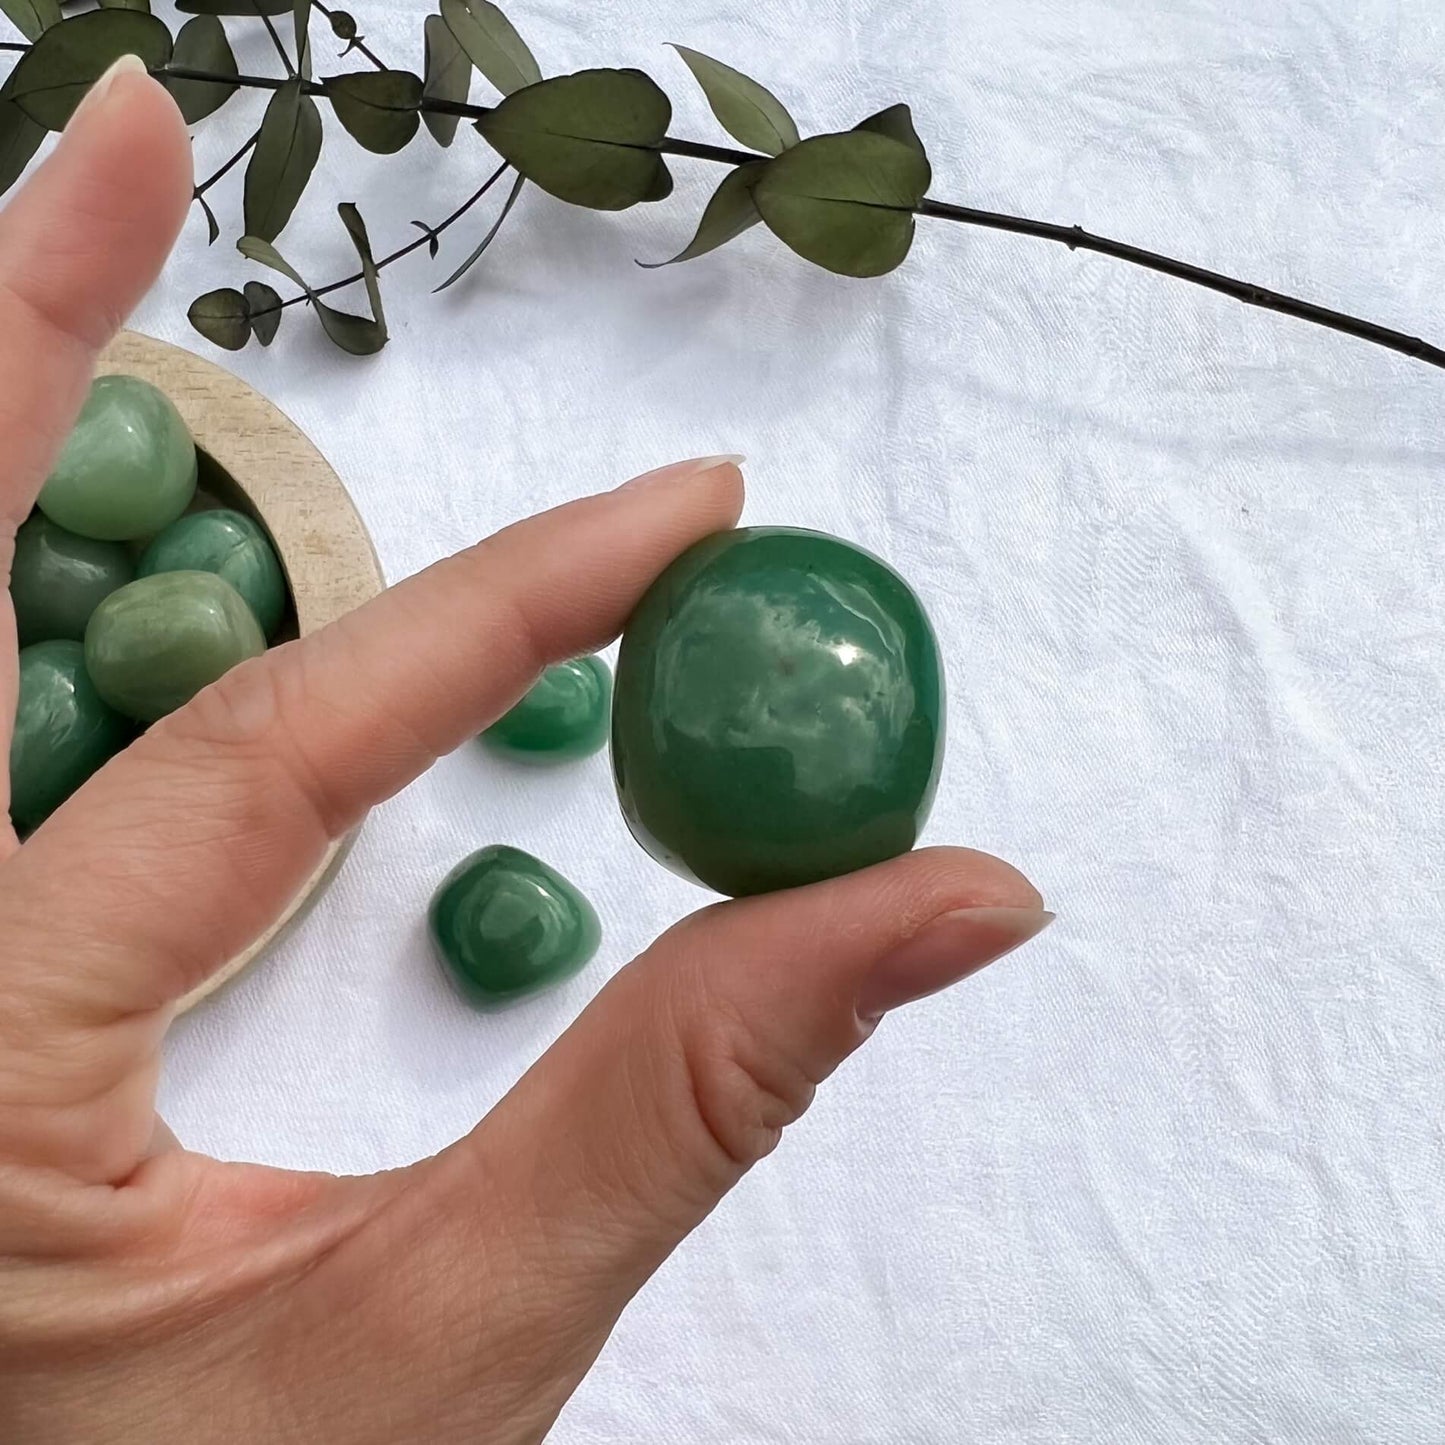 A large glossy green aventurine crystal tumble stone held in pinched fingers